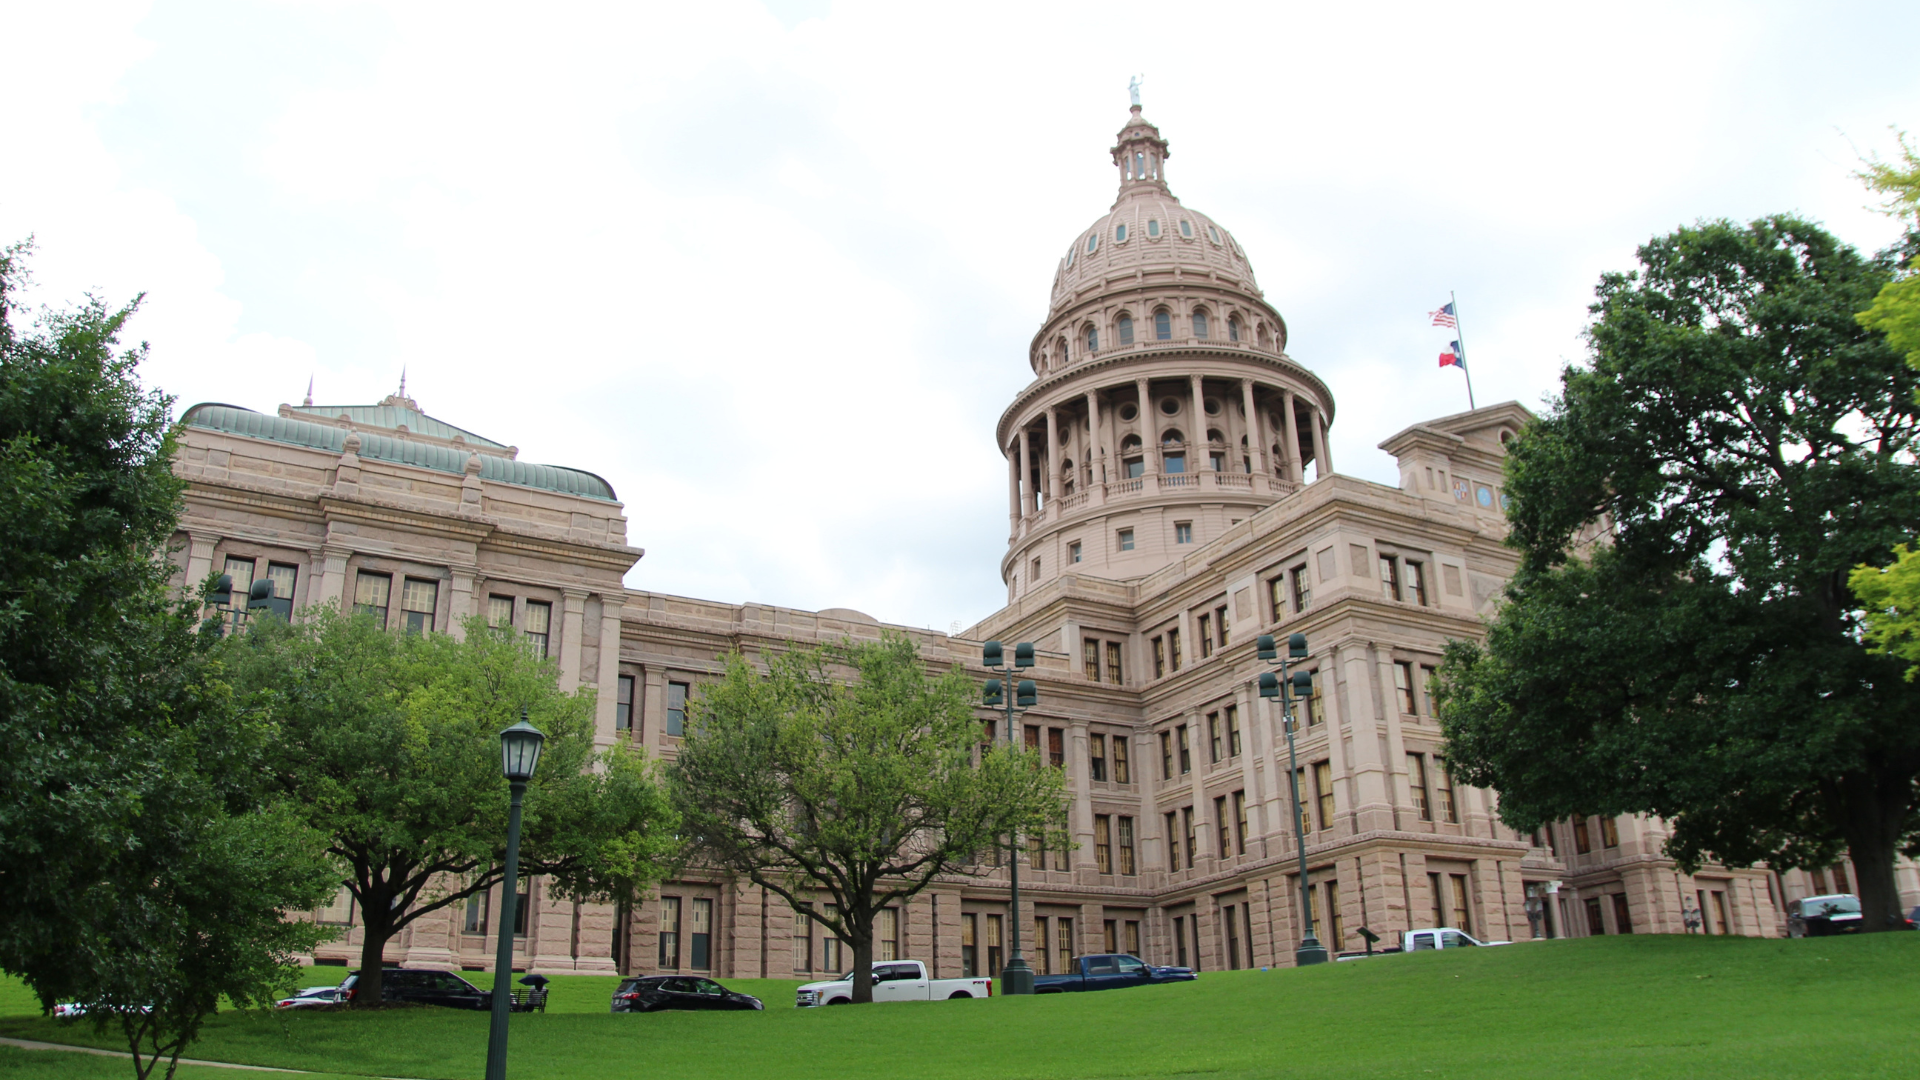 the Texas capitol building